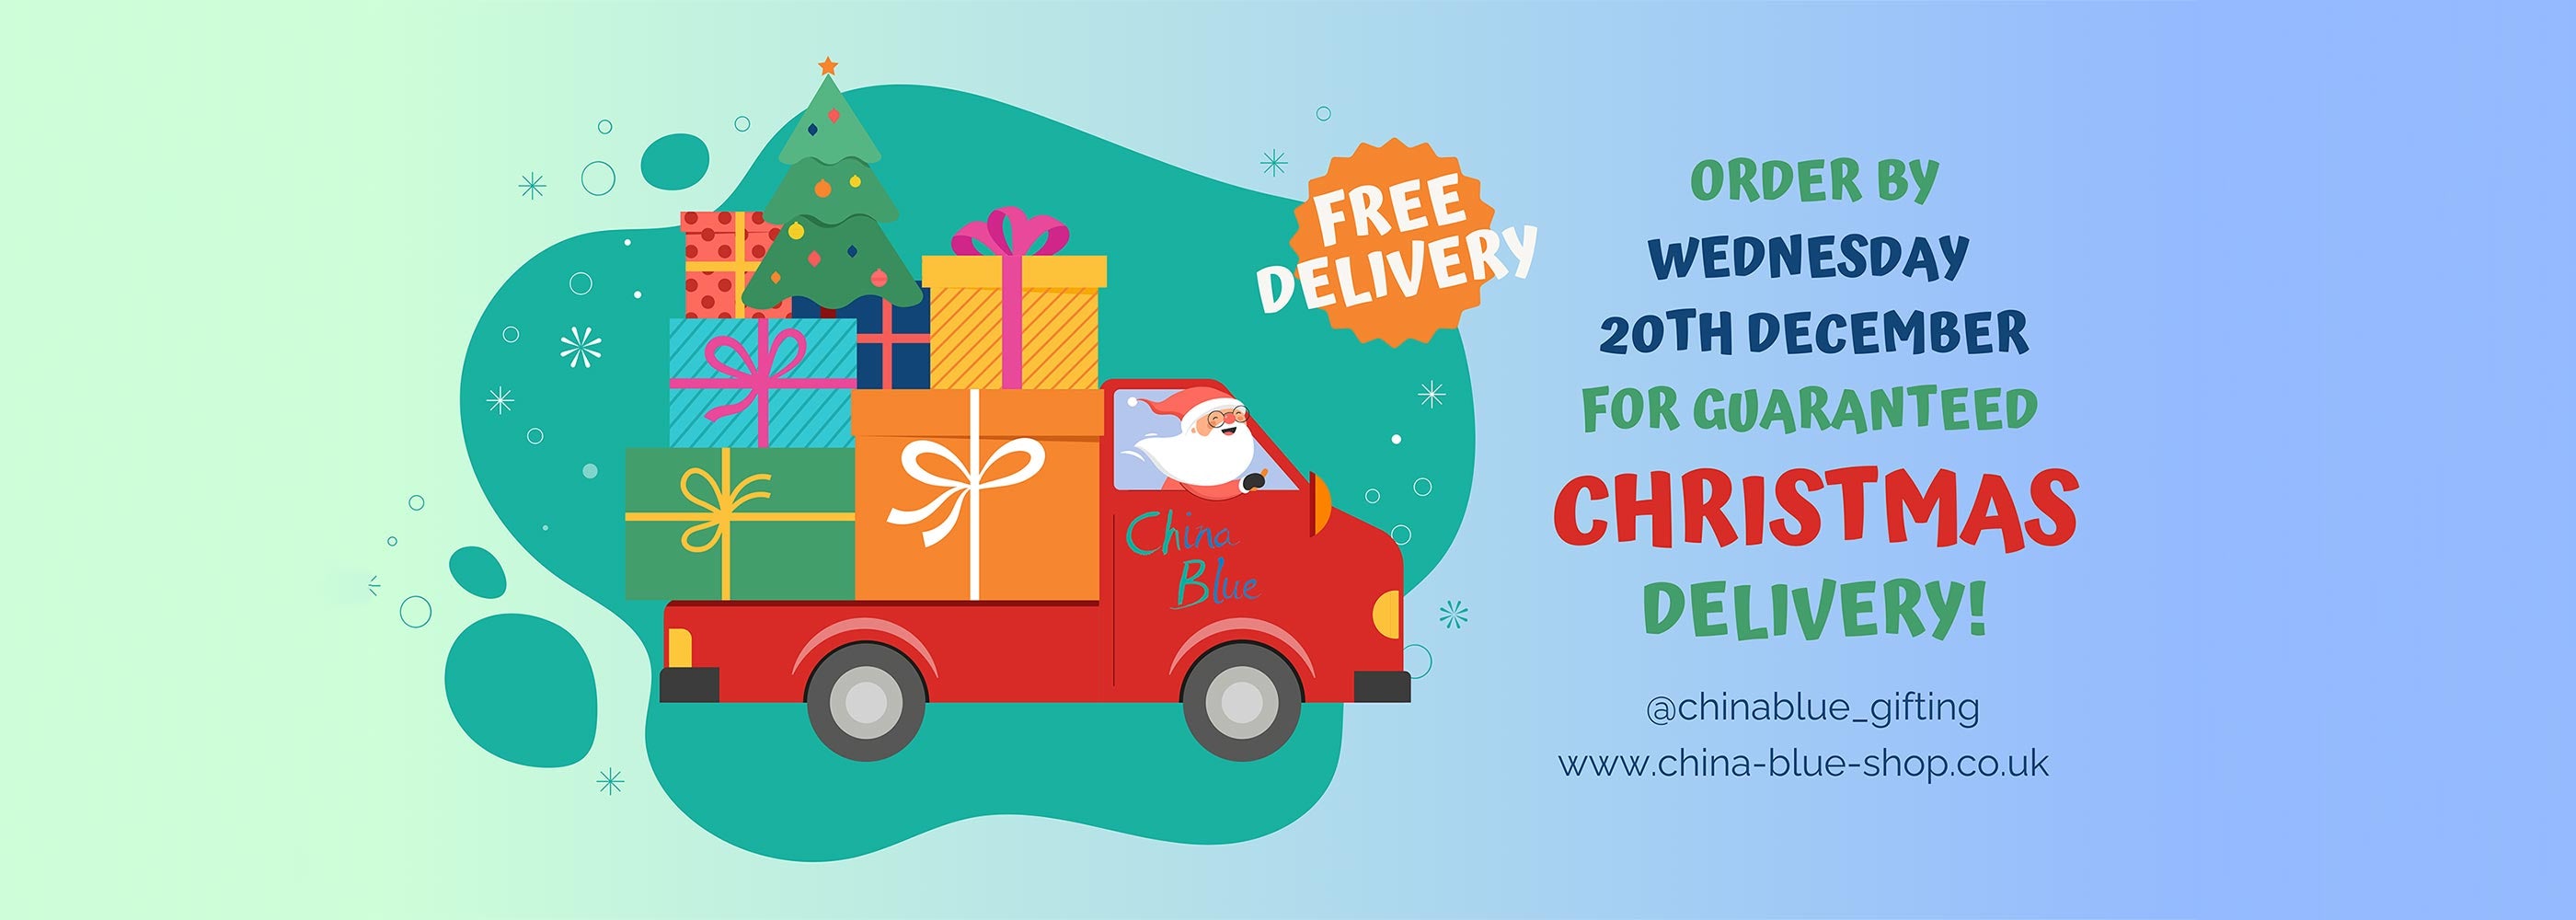 Order by 20th December for guaranteed Christmas delivery